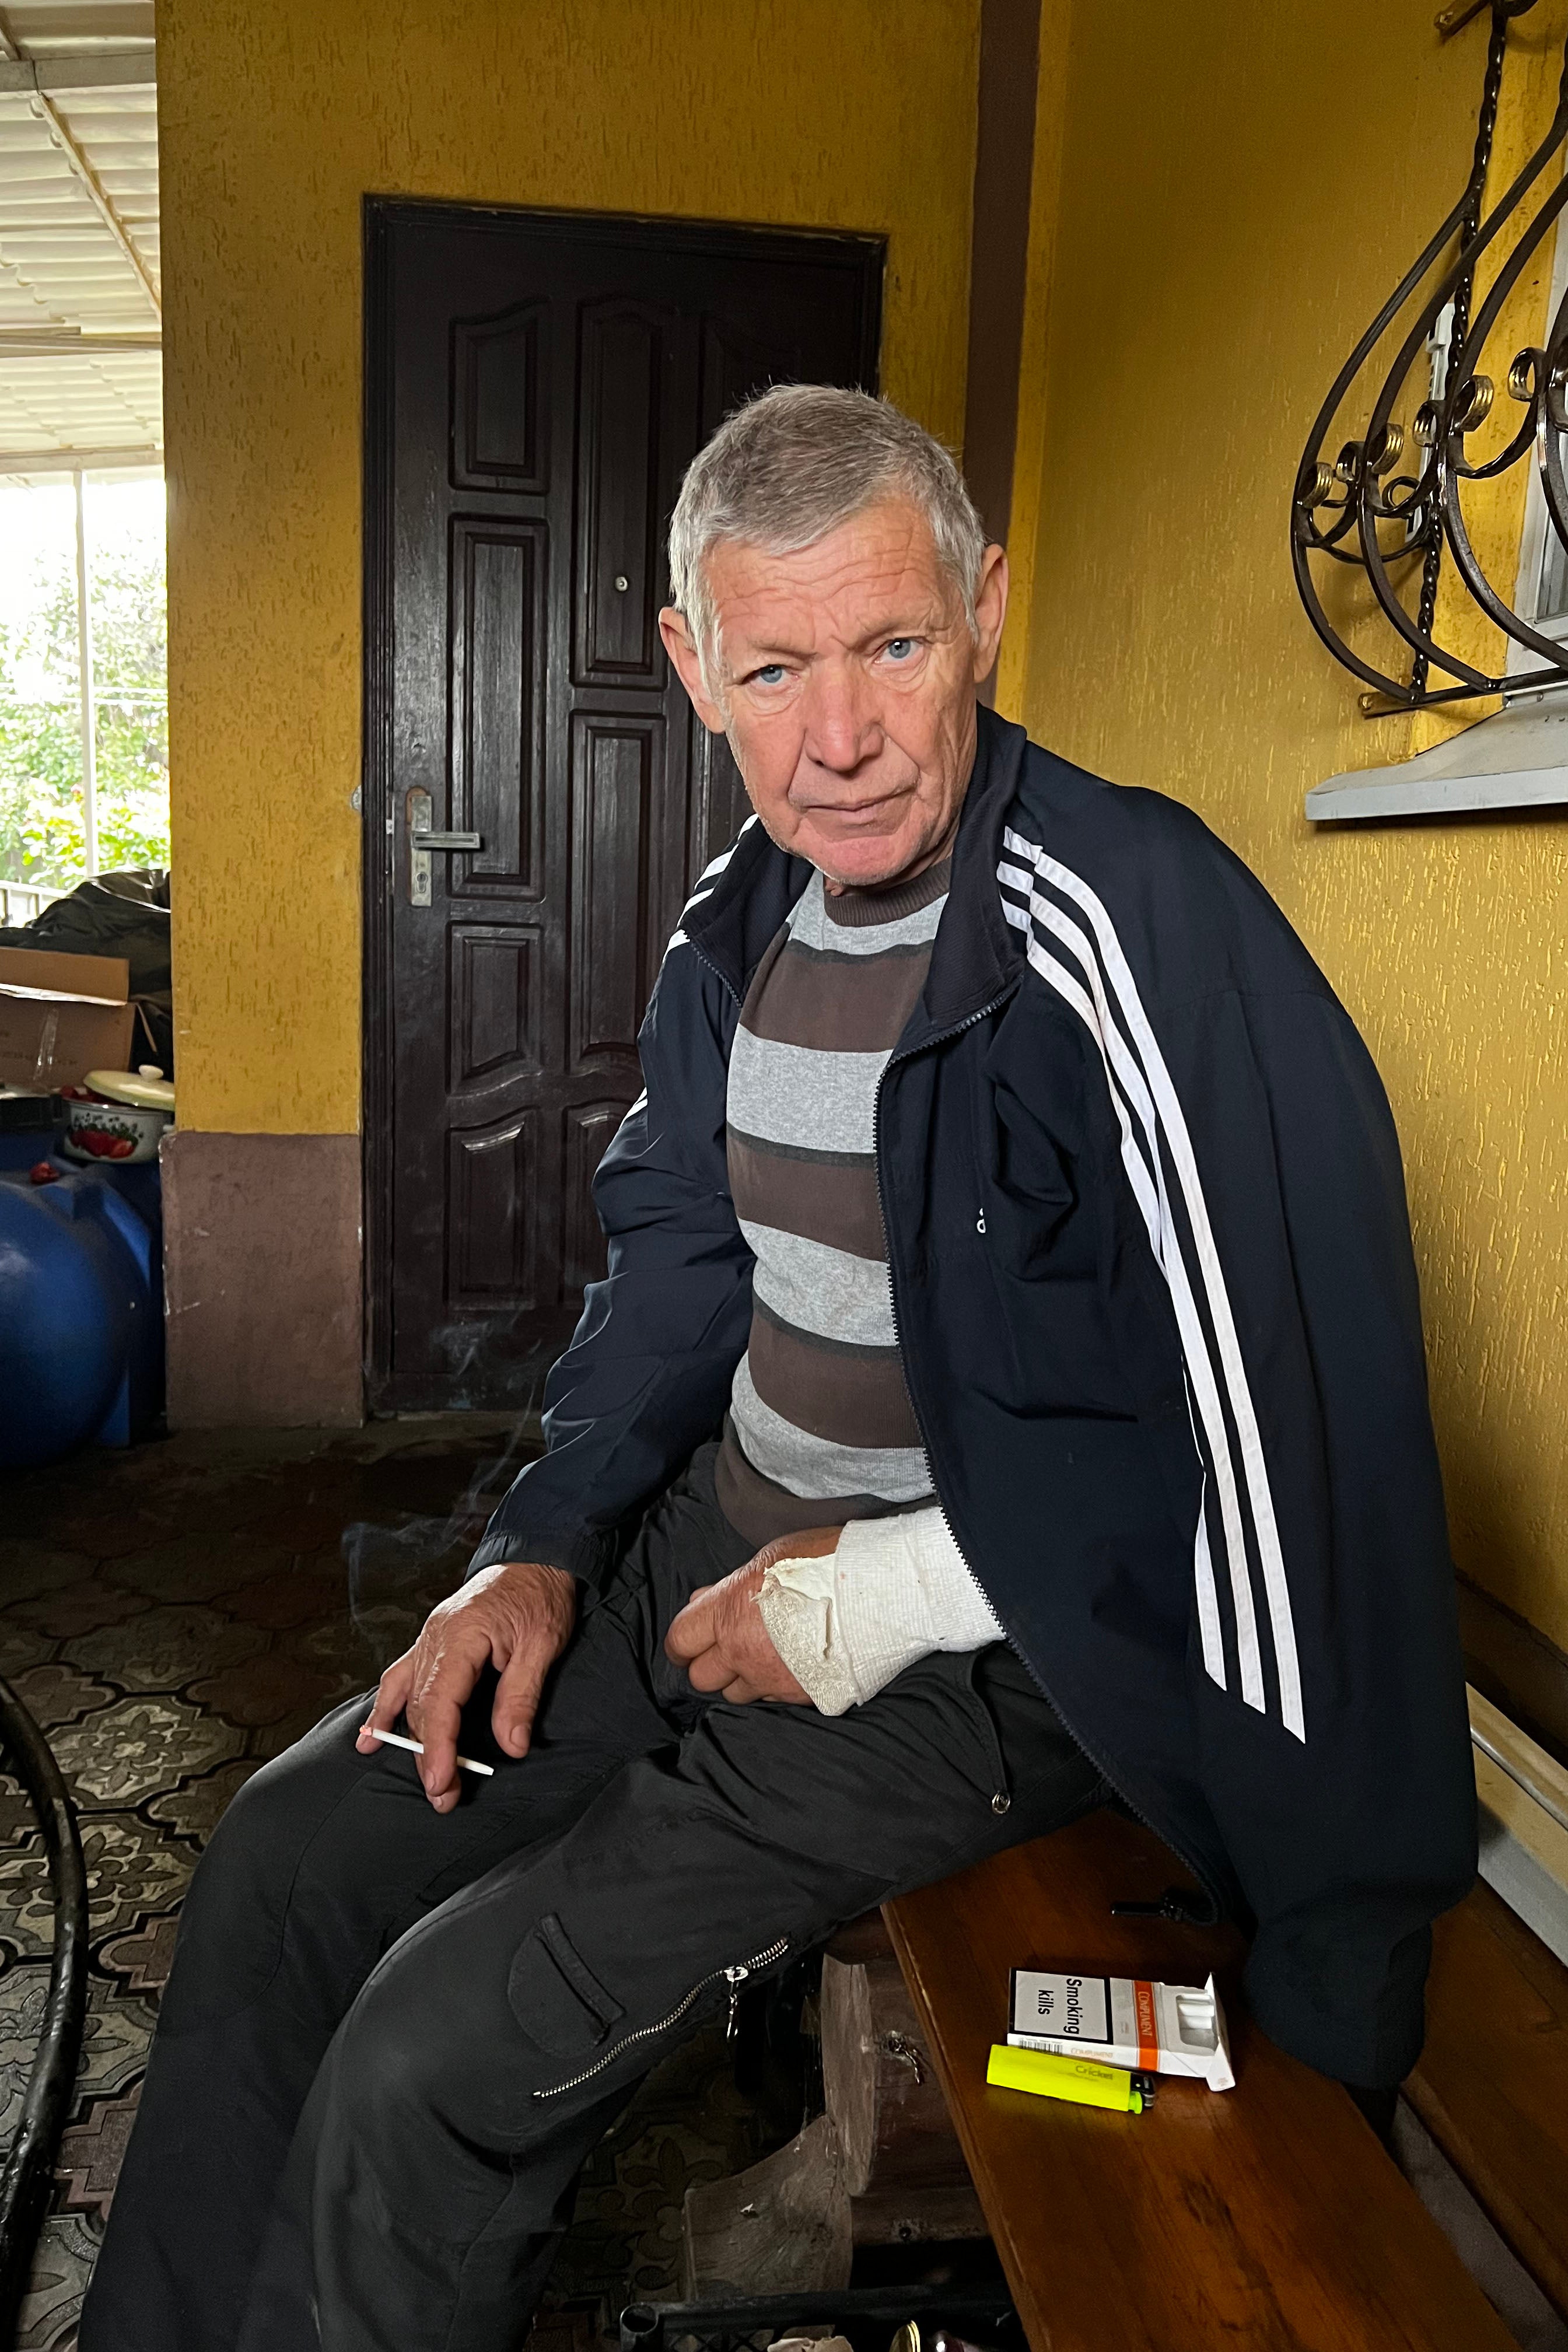 Mykhailo Ivanovych, 67, who was detained in late August 2022 for 12 days. A soldier broke his left arm when he hit him with what Ivanovych thought was a plastic pipe, Izium, Ukraine, September 23, 2022